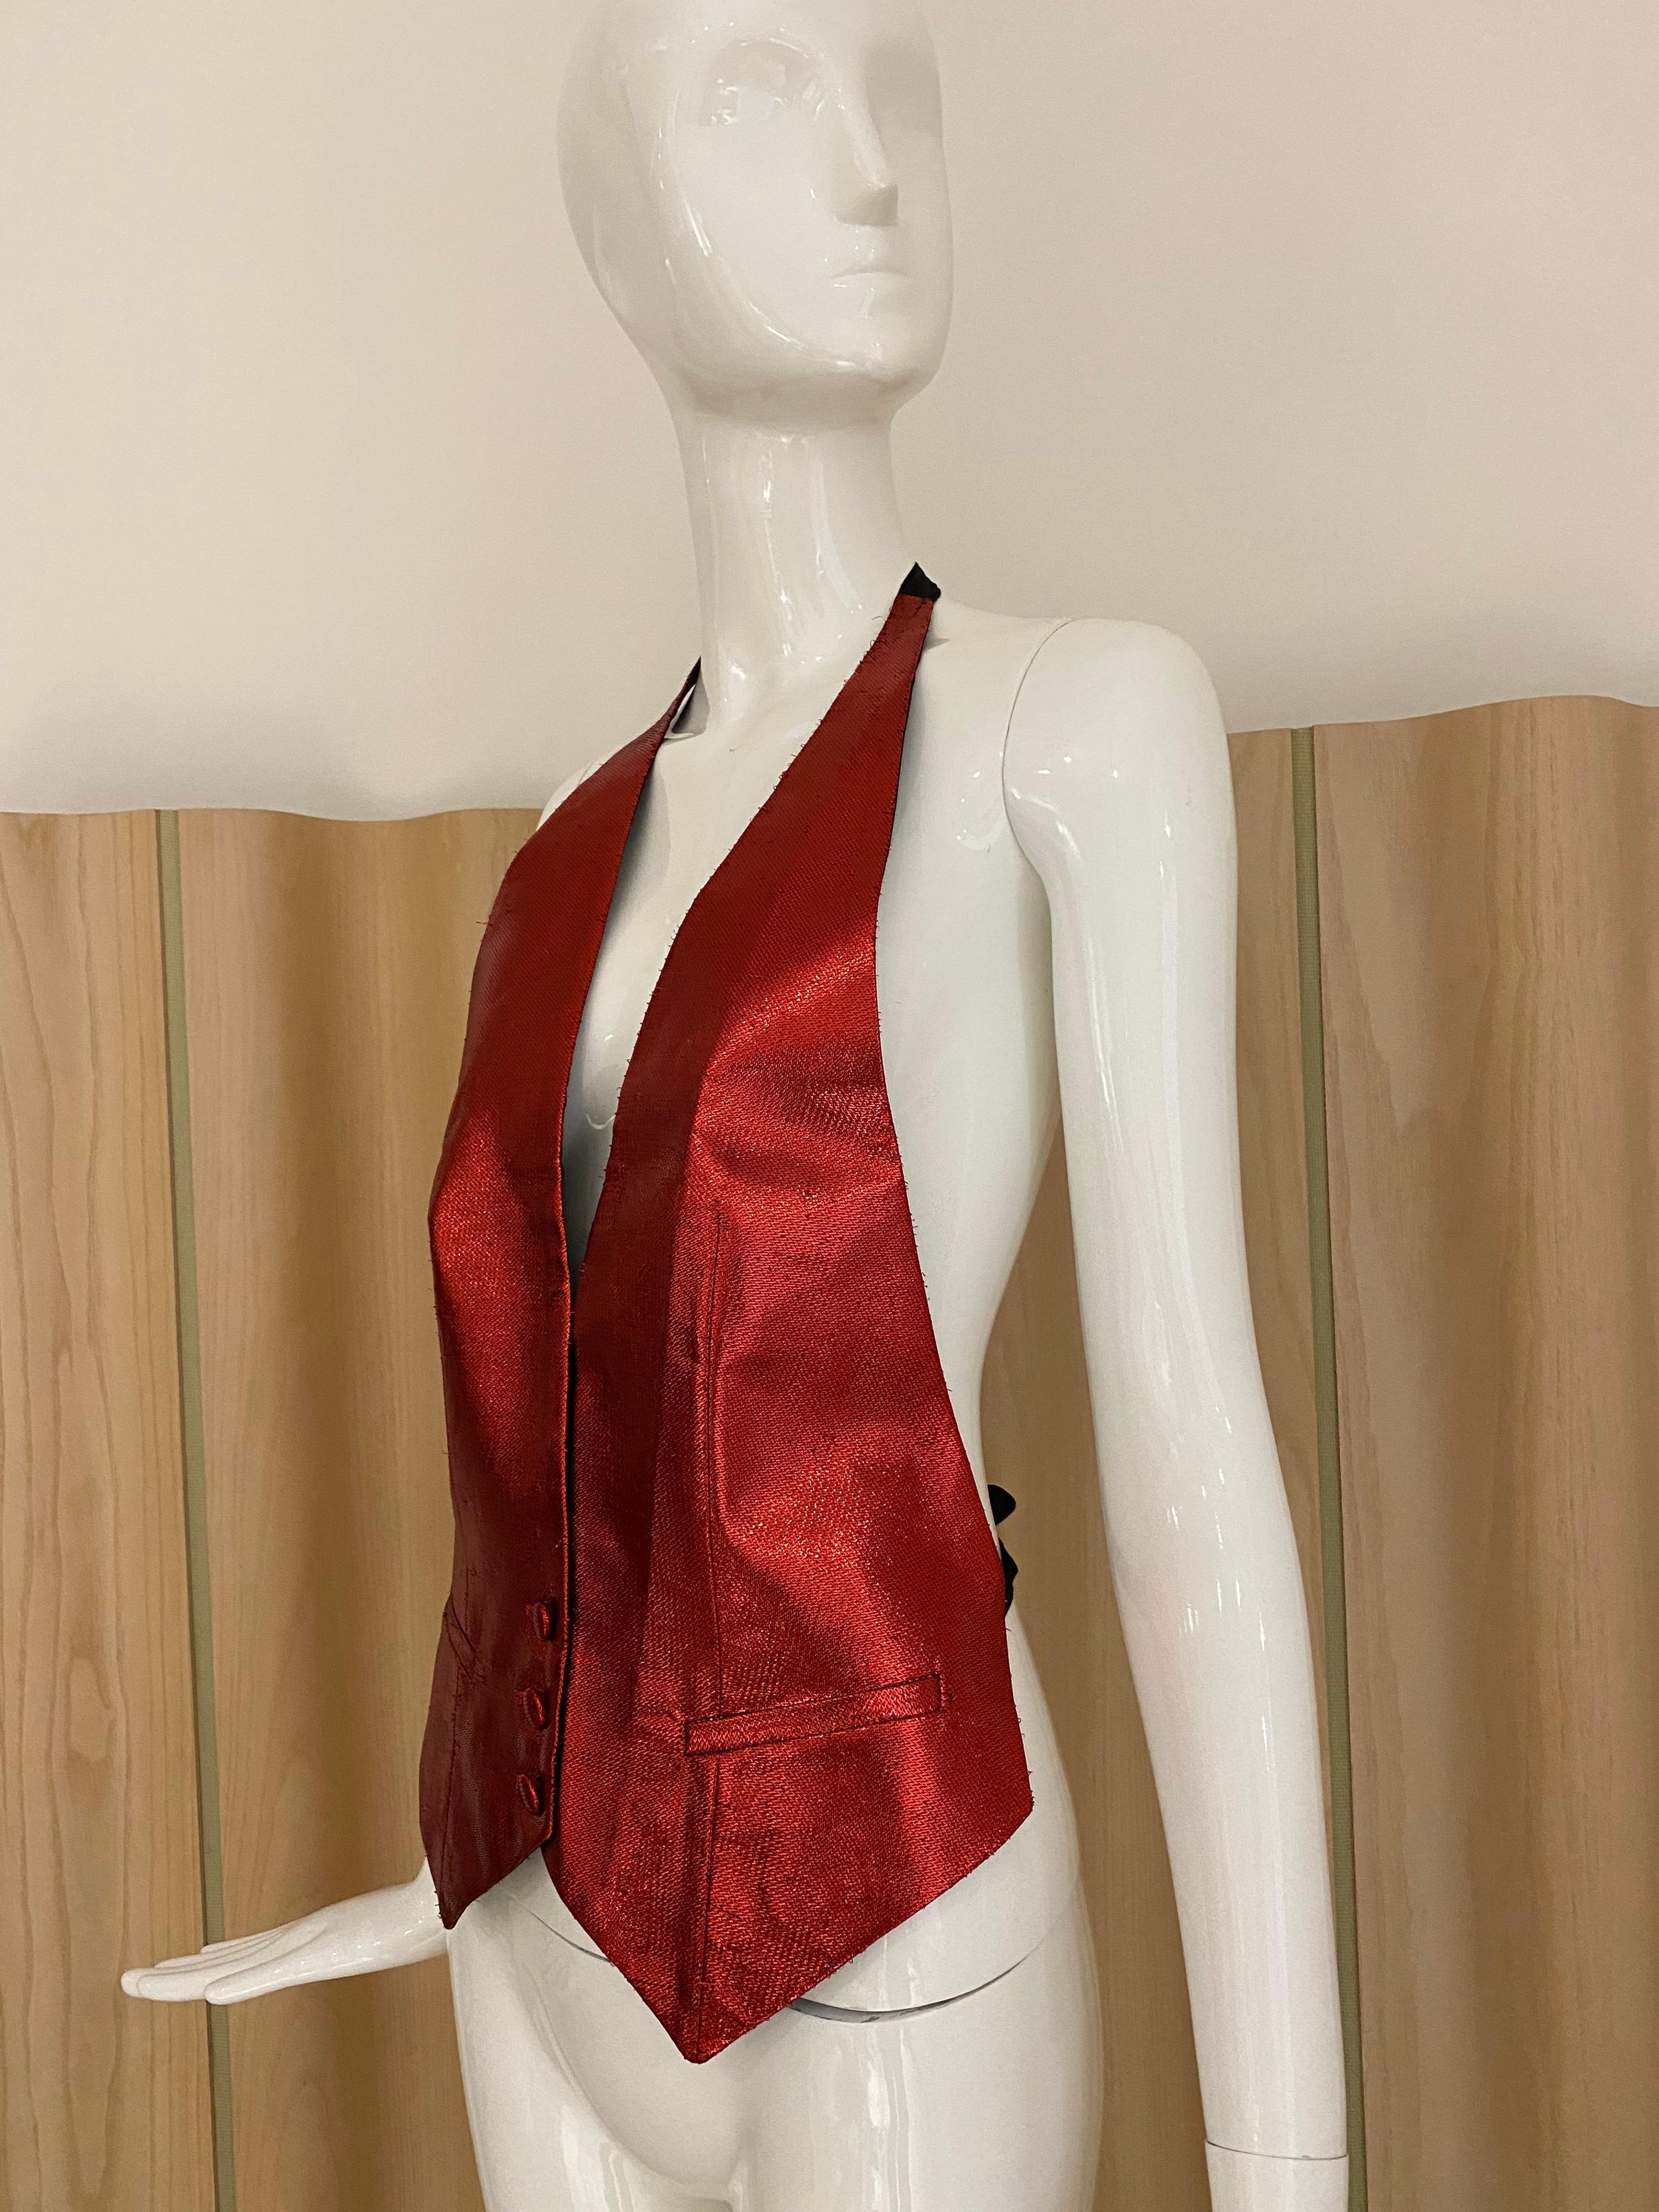 Margiela Red Silk Vest (bare back) with silk ties with hang tags
Size: 42/ Fit US 2/4/6